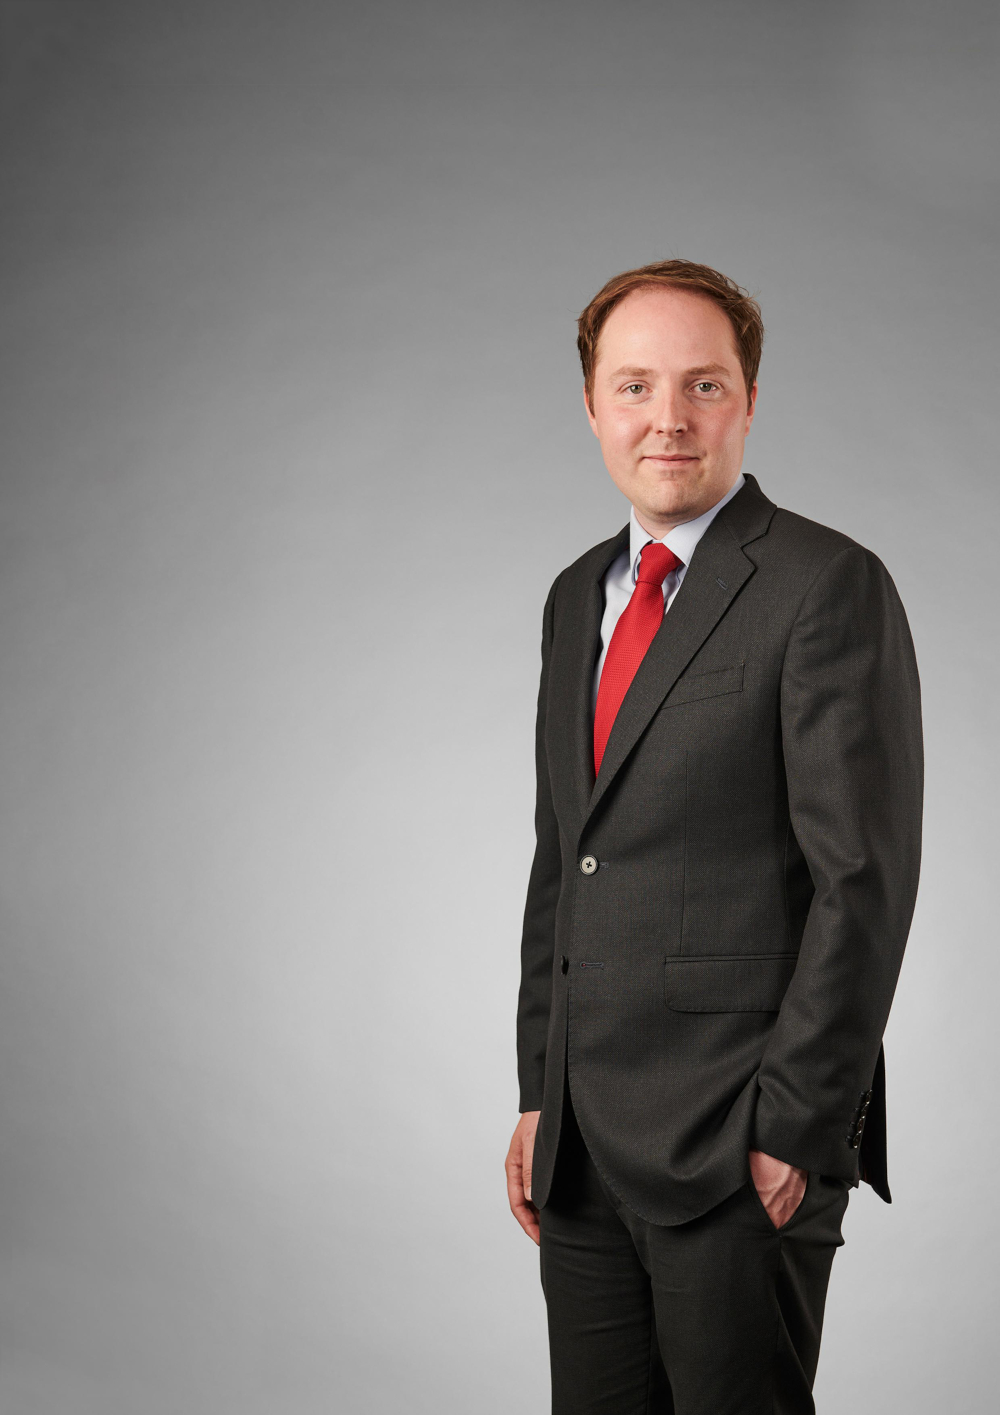 Burness Paull partner Edward Hunter recognised as rising star in The Lawyer’s Hot 100